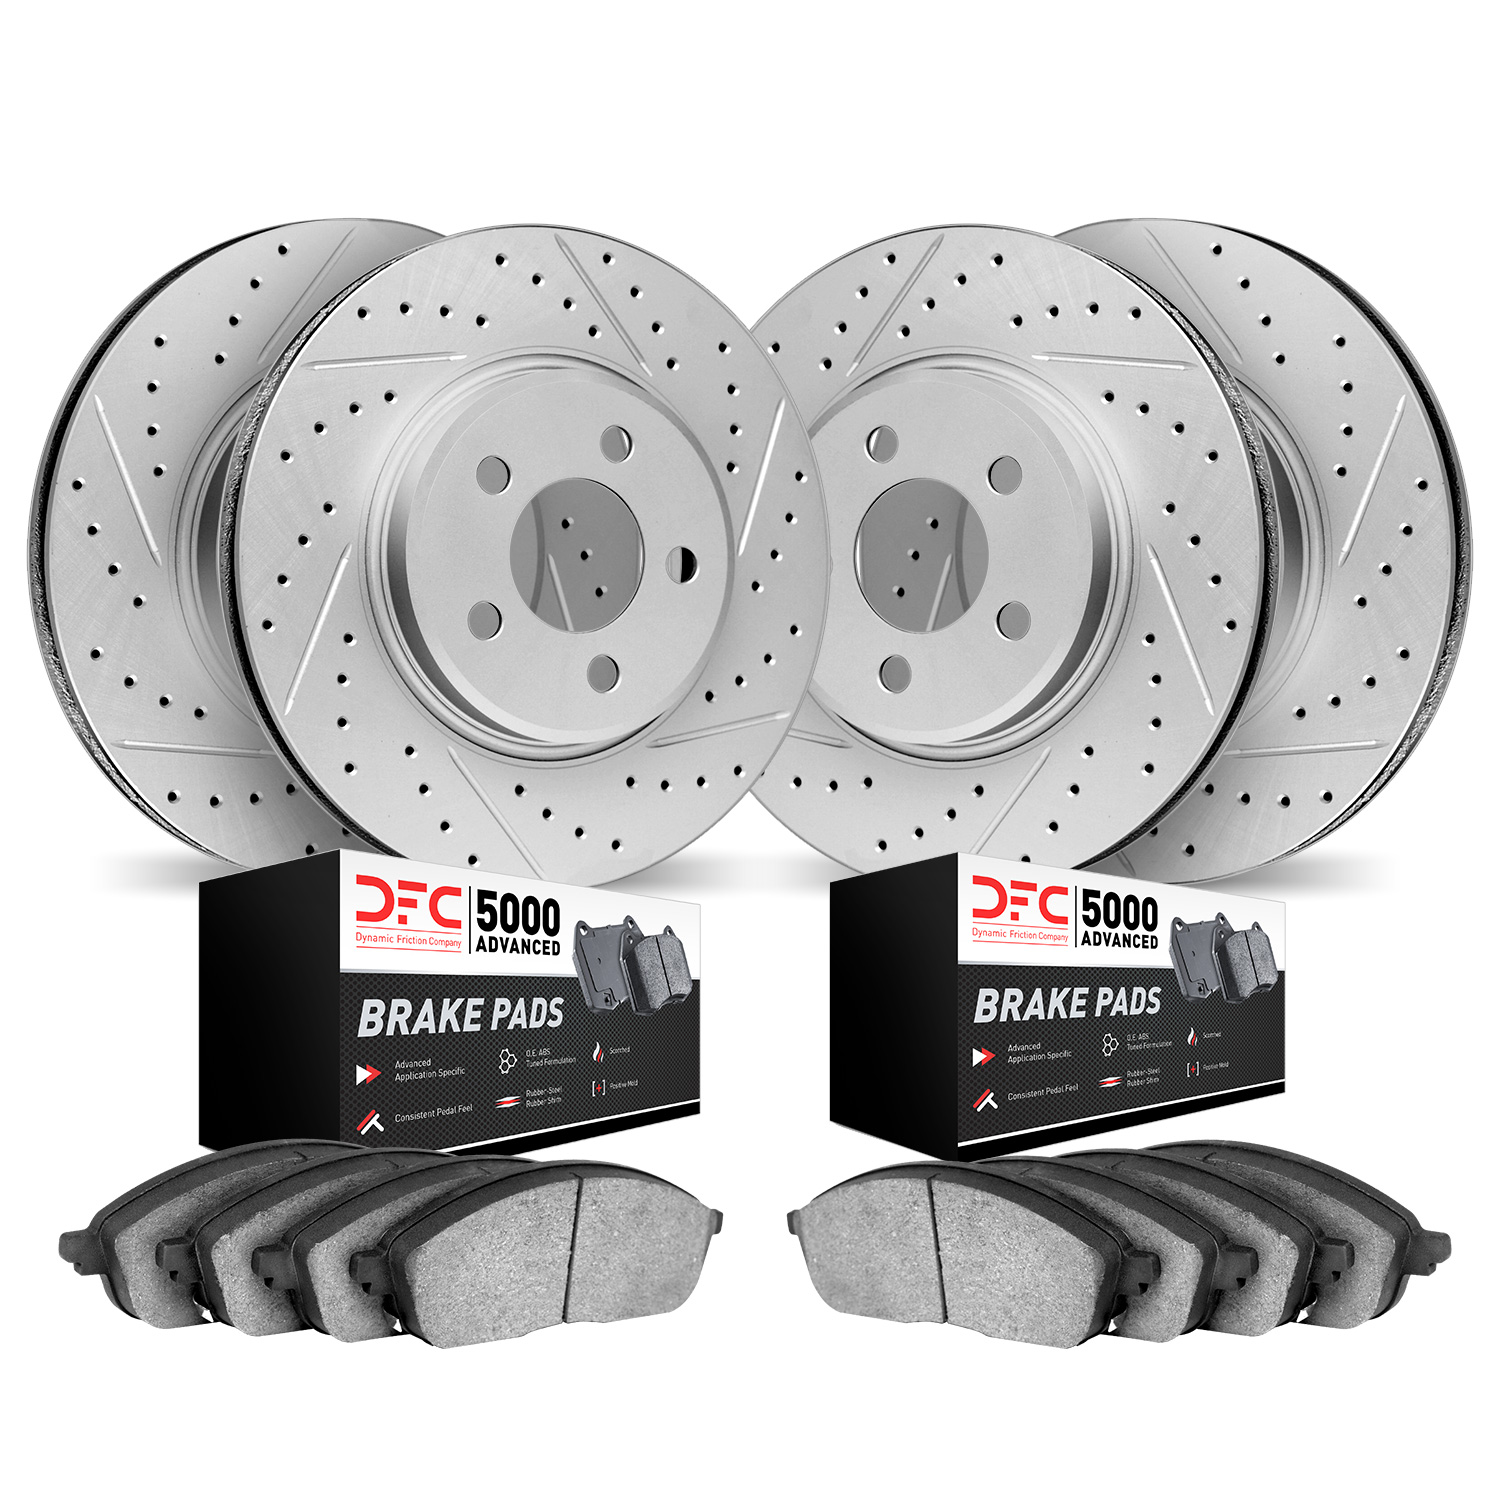 2504-68000 Geoperformance Drilled/Slotted Rotors w/5000 Advanced Brake Pads Kit, 2003-2008 Infiniti/Nissan, Position: Front and